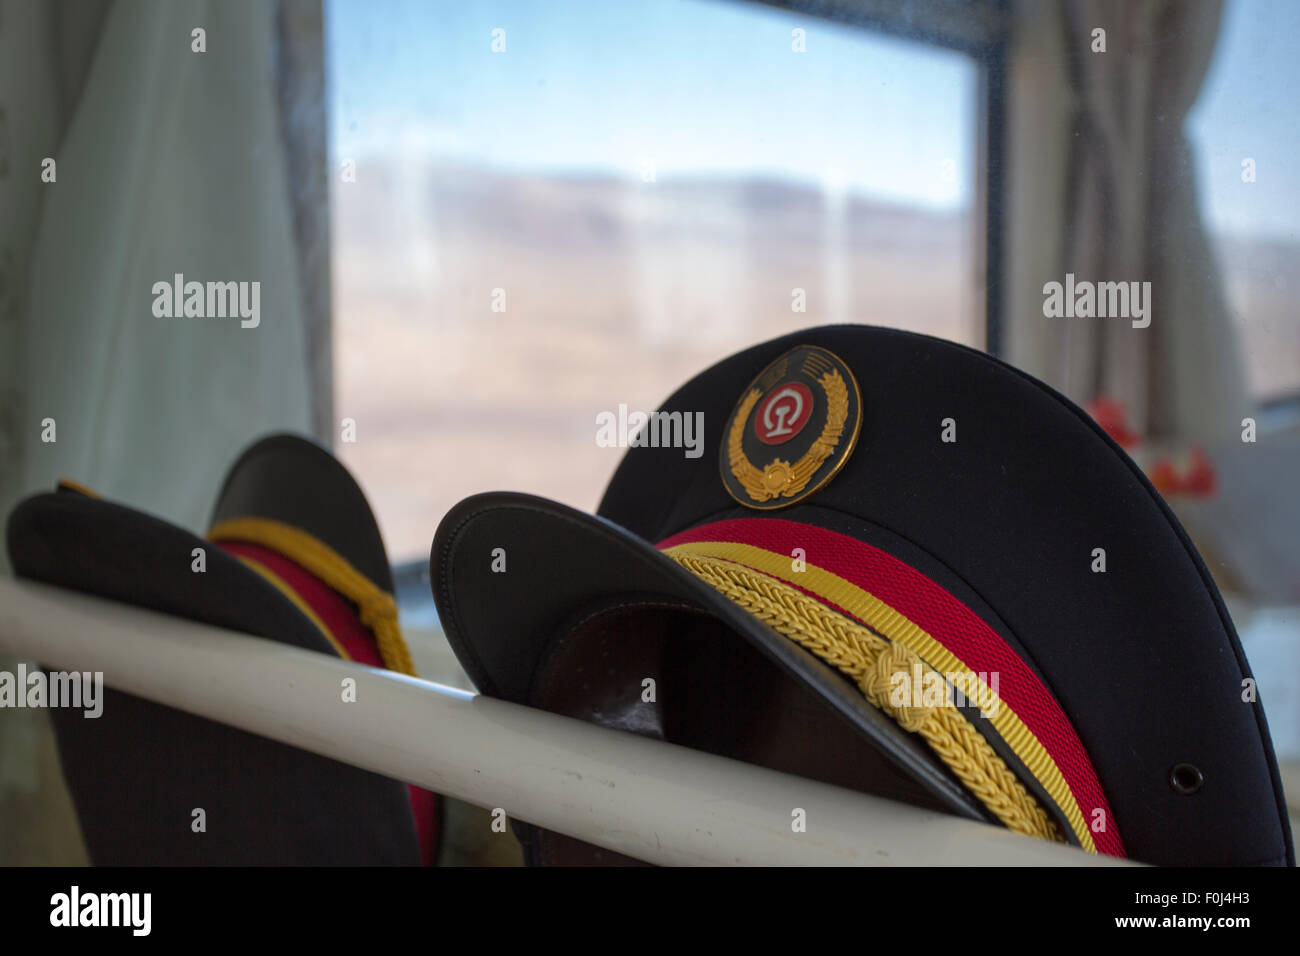 Two uniform-hats in the Train Lhasa - Shanghai.  China, 2013 Stock Photo